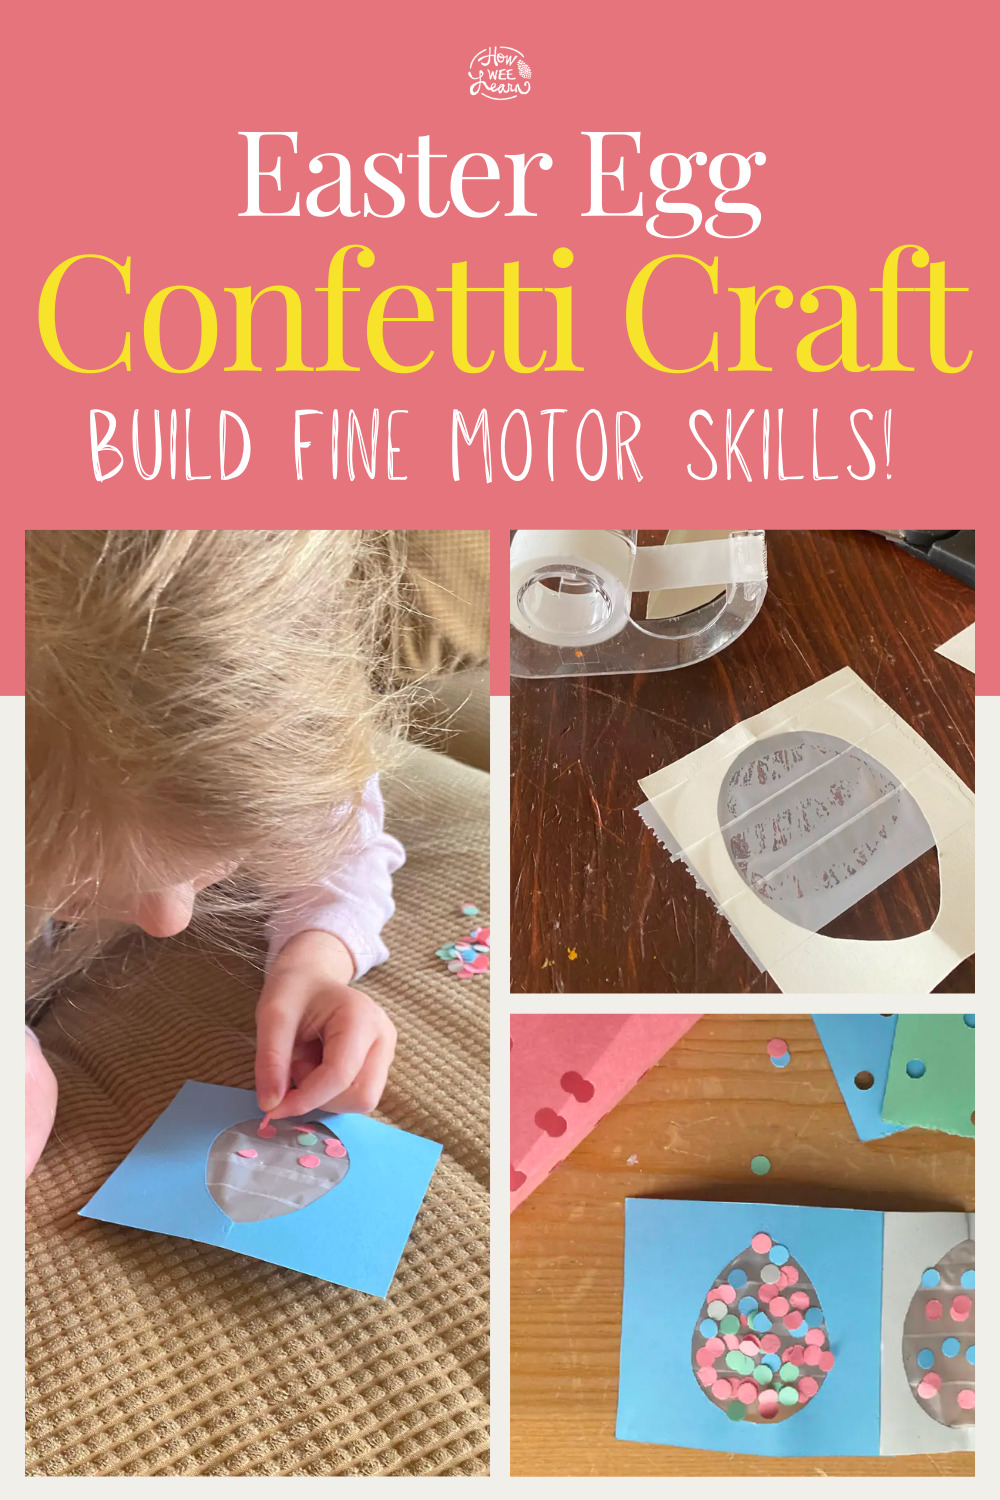 Easter Egg Confetti Craft - Perfect for building fine motor skills!